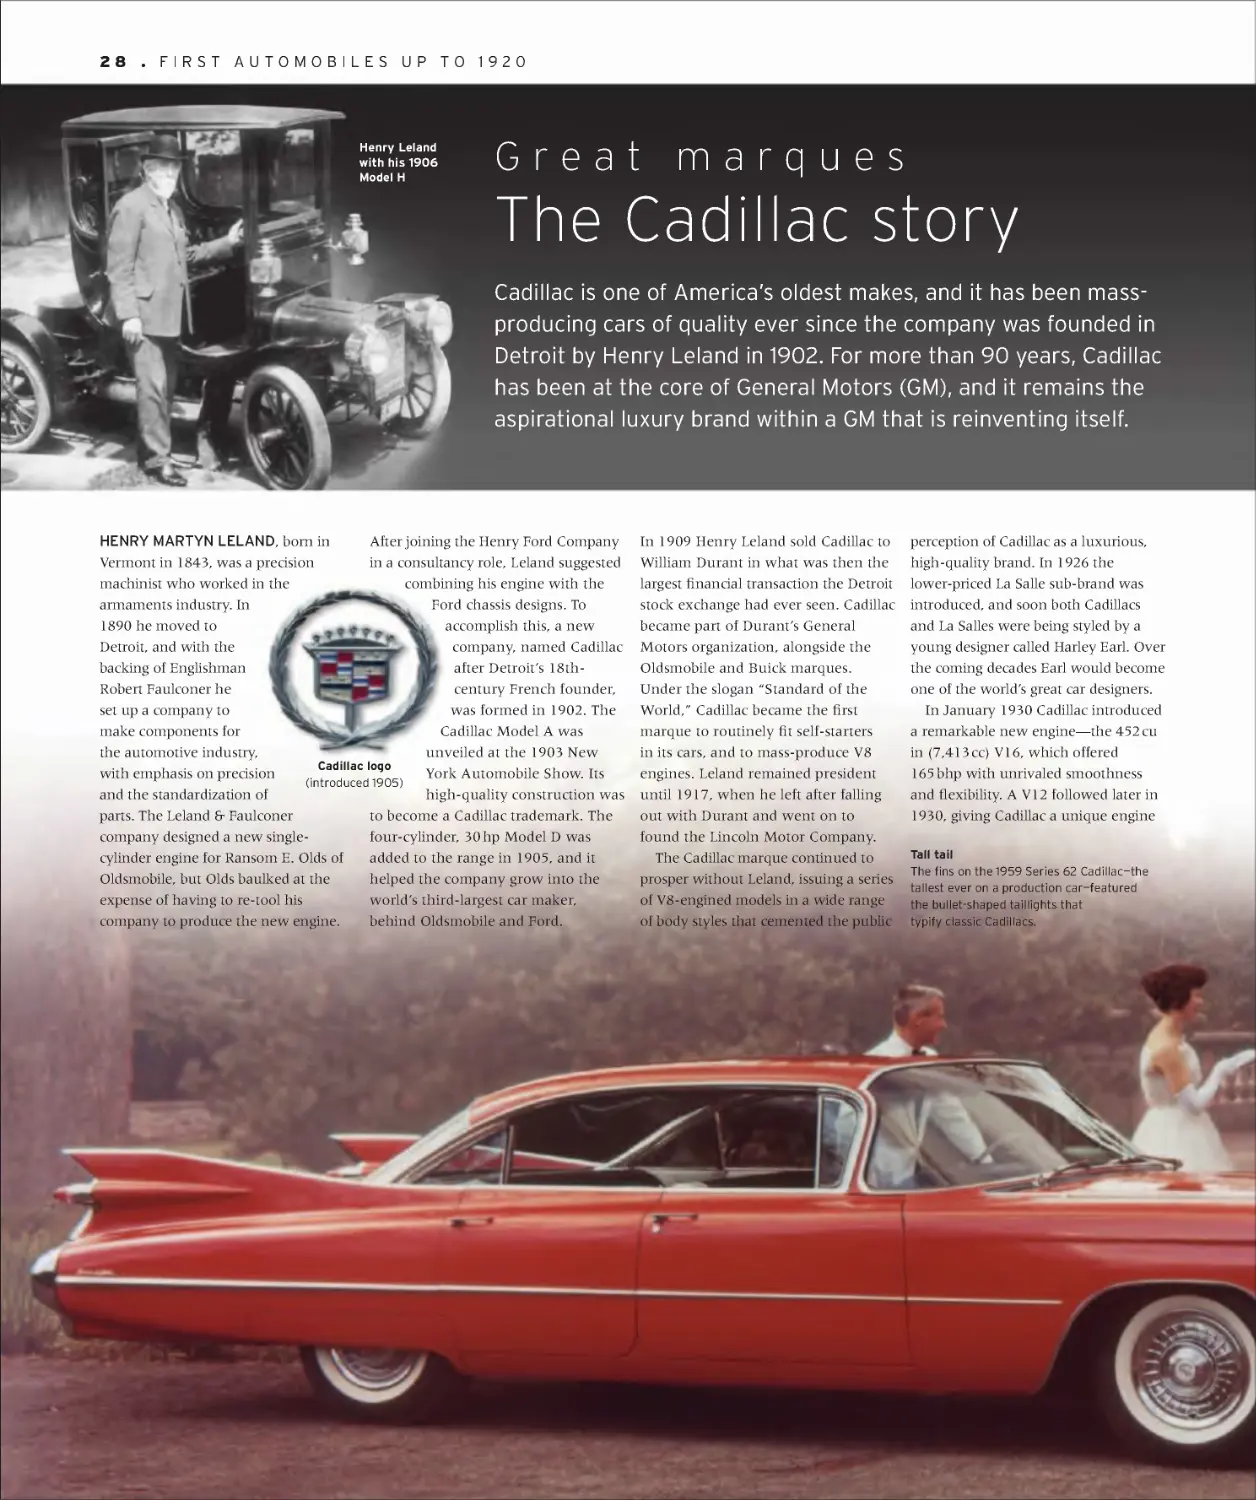 Great marques: The Cadillac story 28